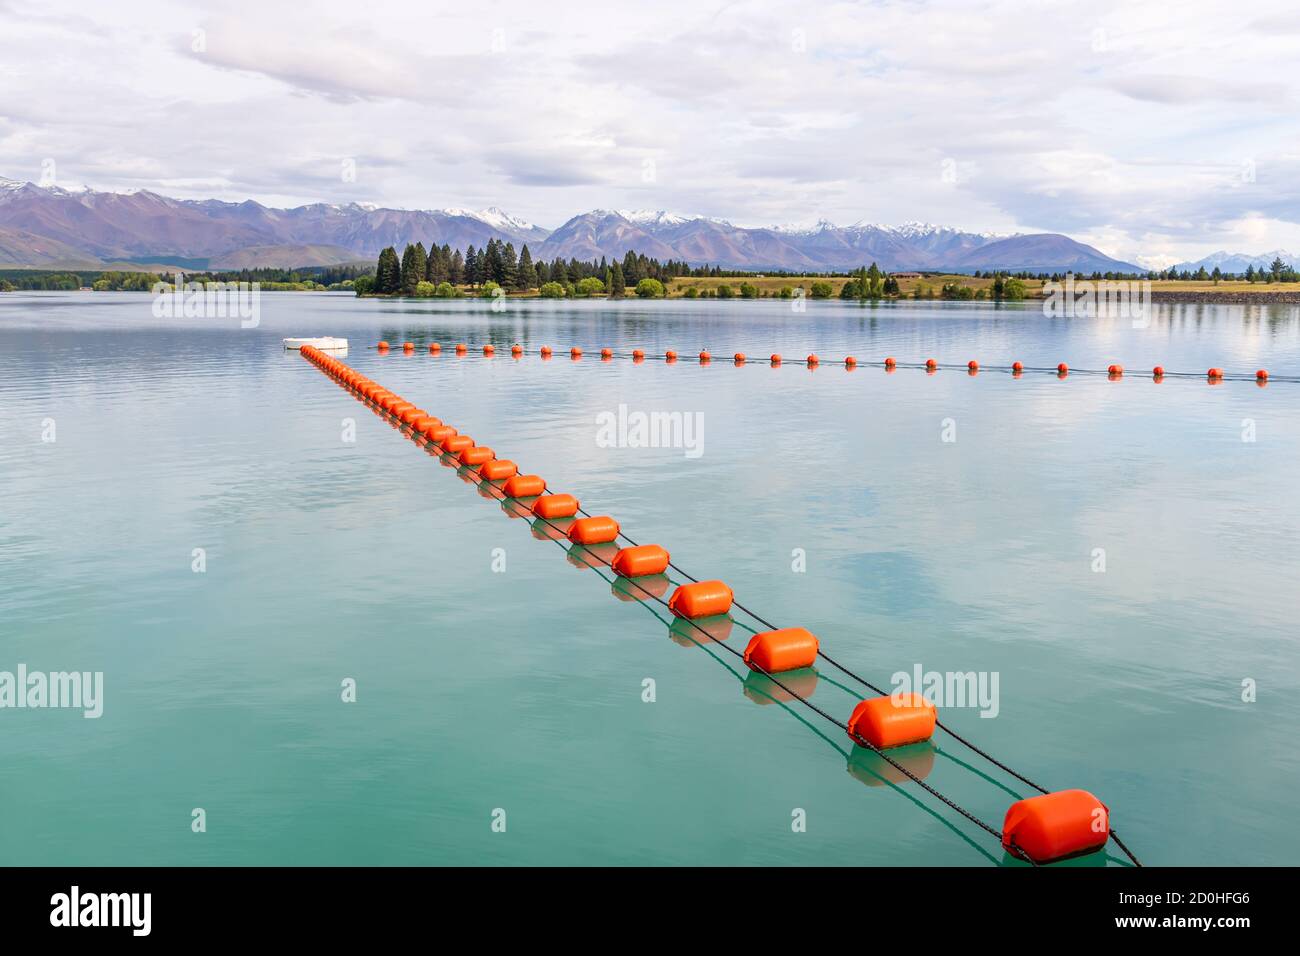 A row of red buoys floating on the water reservoir of Lake Ruataniwha, to protect the inlet to the turbines of the dam at Omarama, Twizel, New Zealand Stock Photo